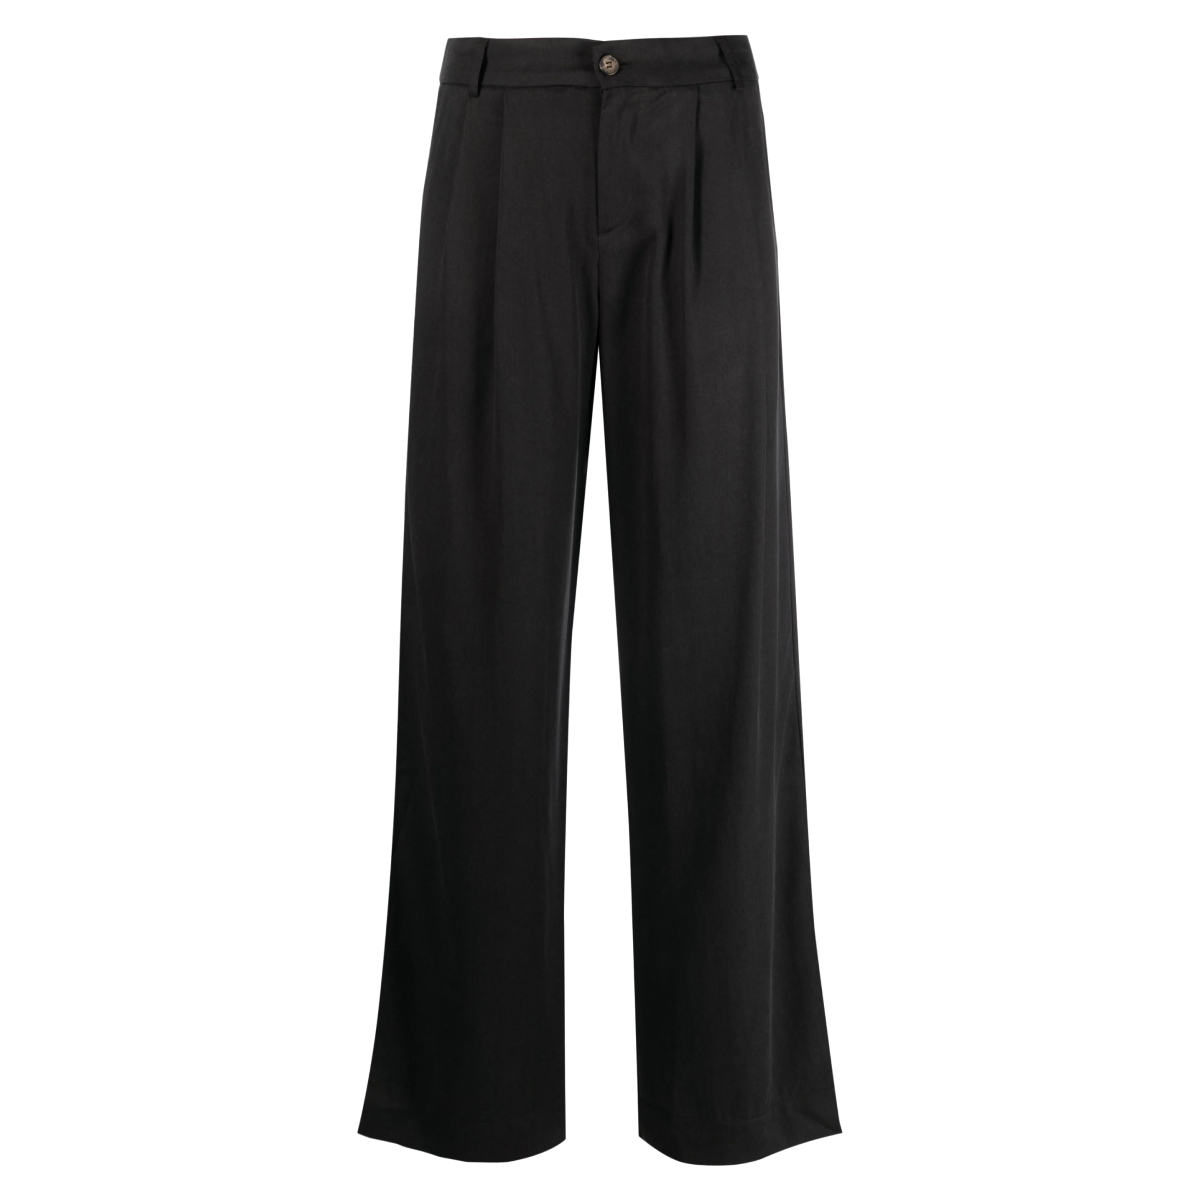 A pair of wide legged high waisted black trousers from Reformation